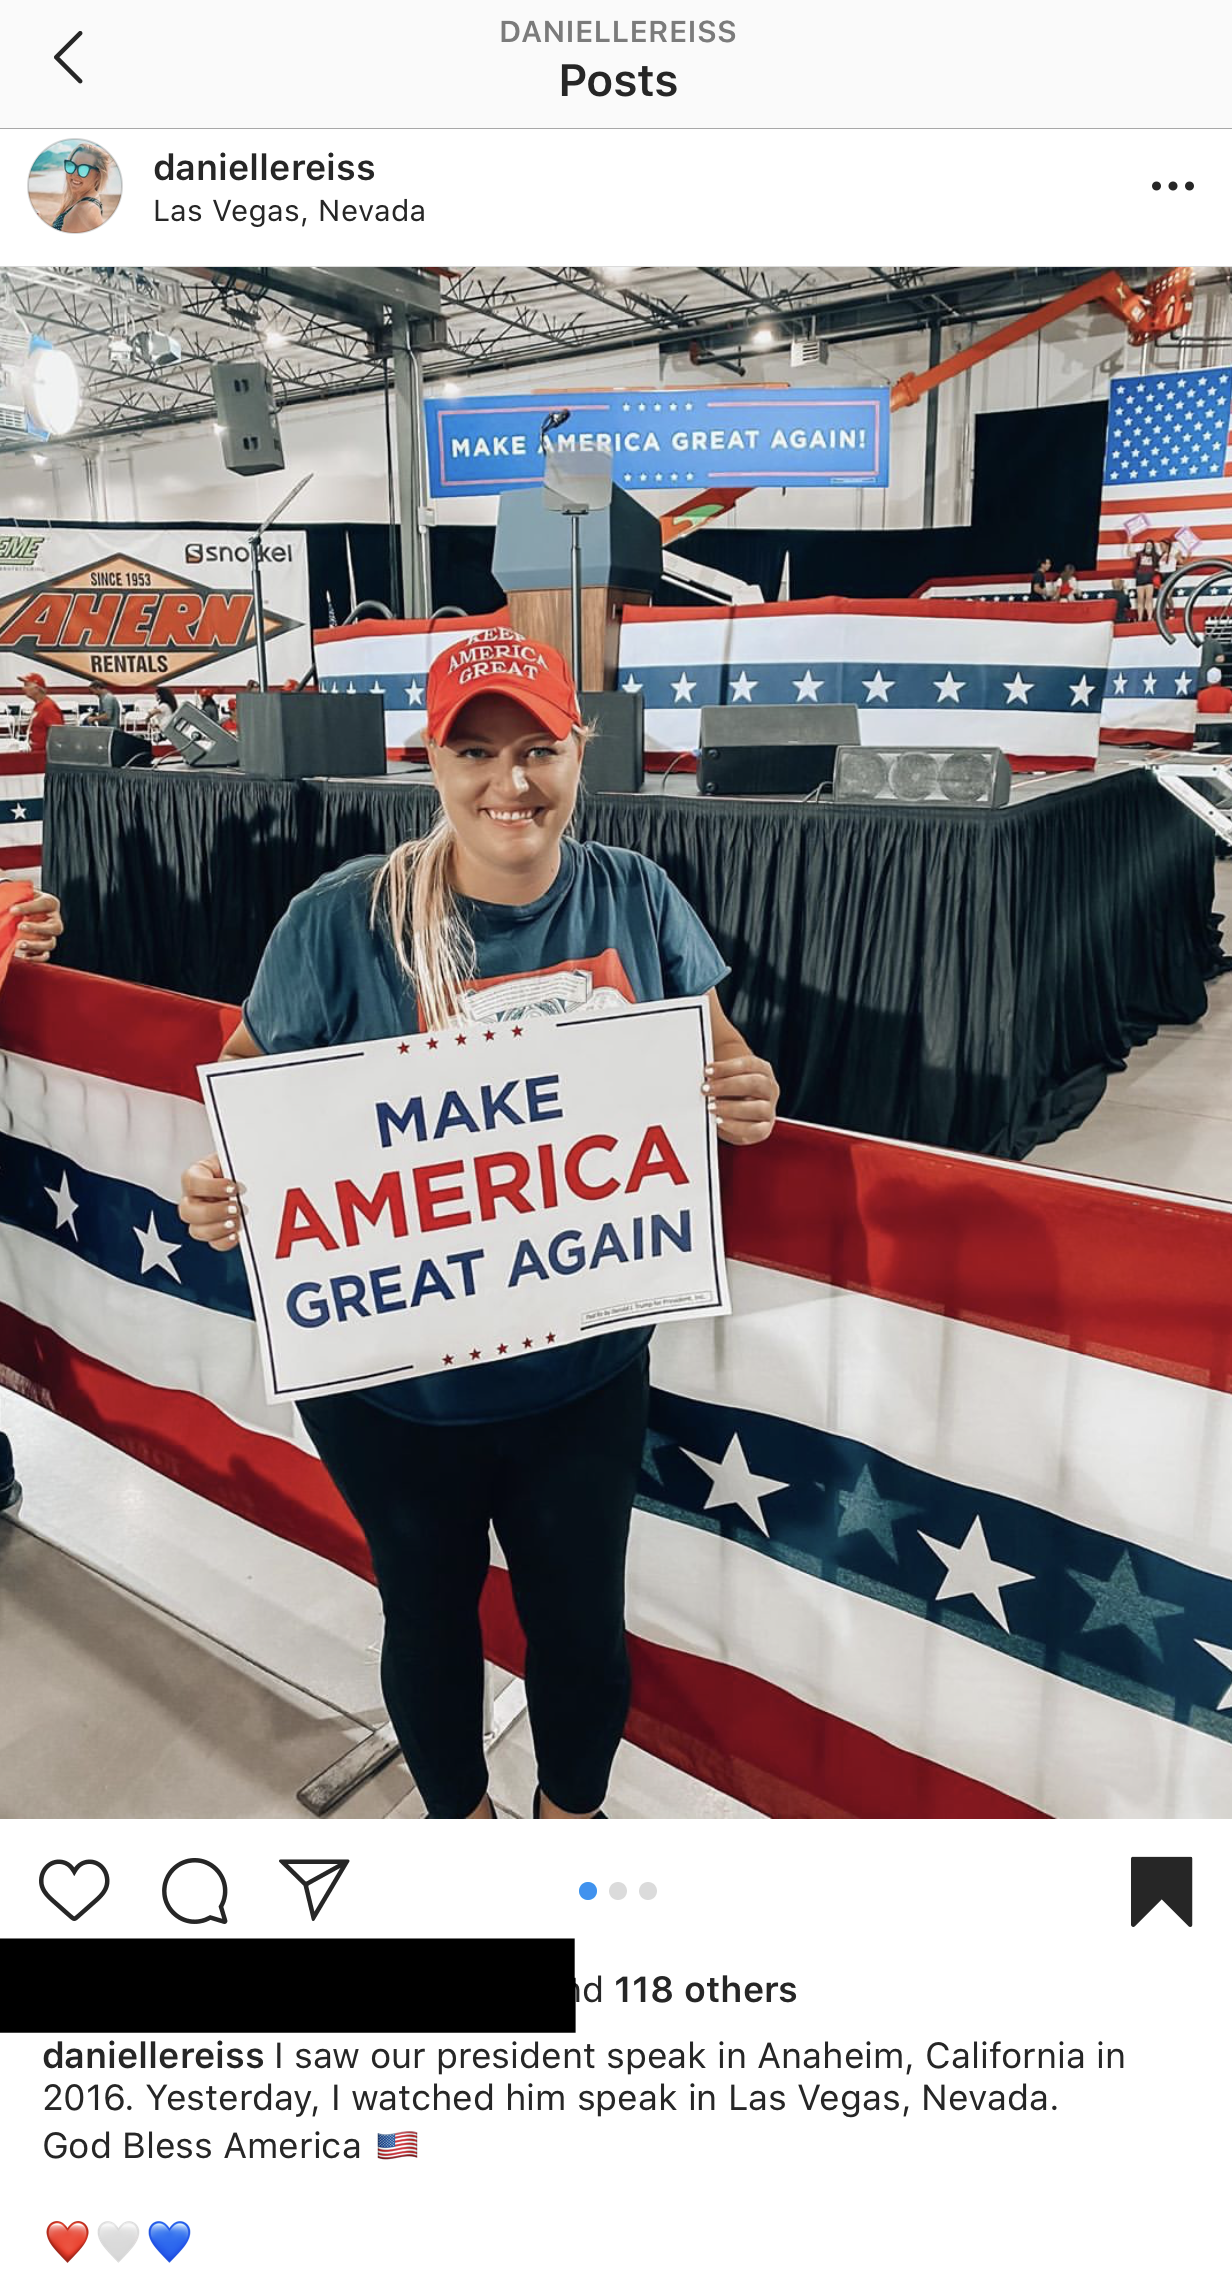 Danielle Reiss attended a Sept. 13 rally for President Donald Trump. She is holding a 'Make America Great Again' poster while wearing a red 'Make America Great Again' hat. Reiss was allegedly fired for the post. (Screenshot/Instagram)